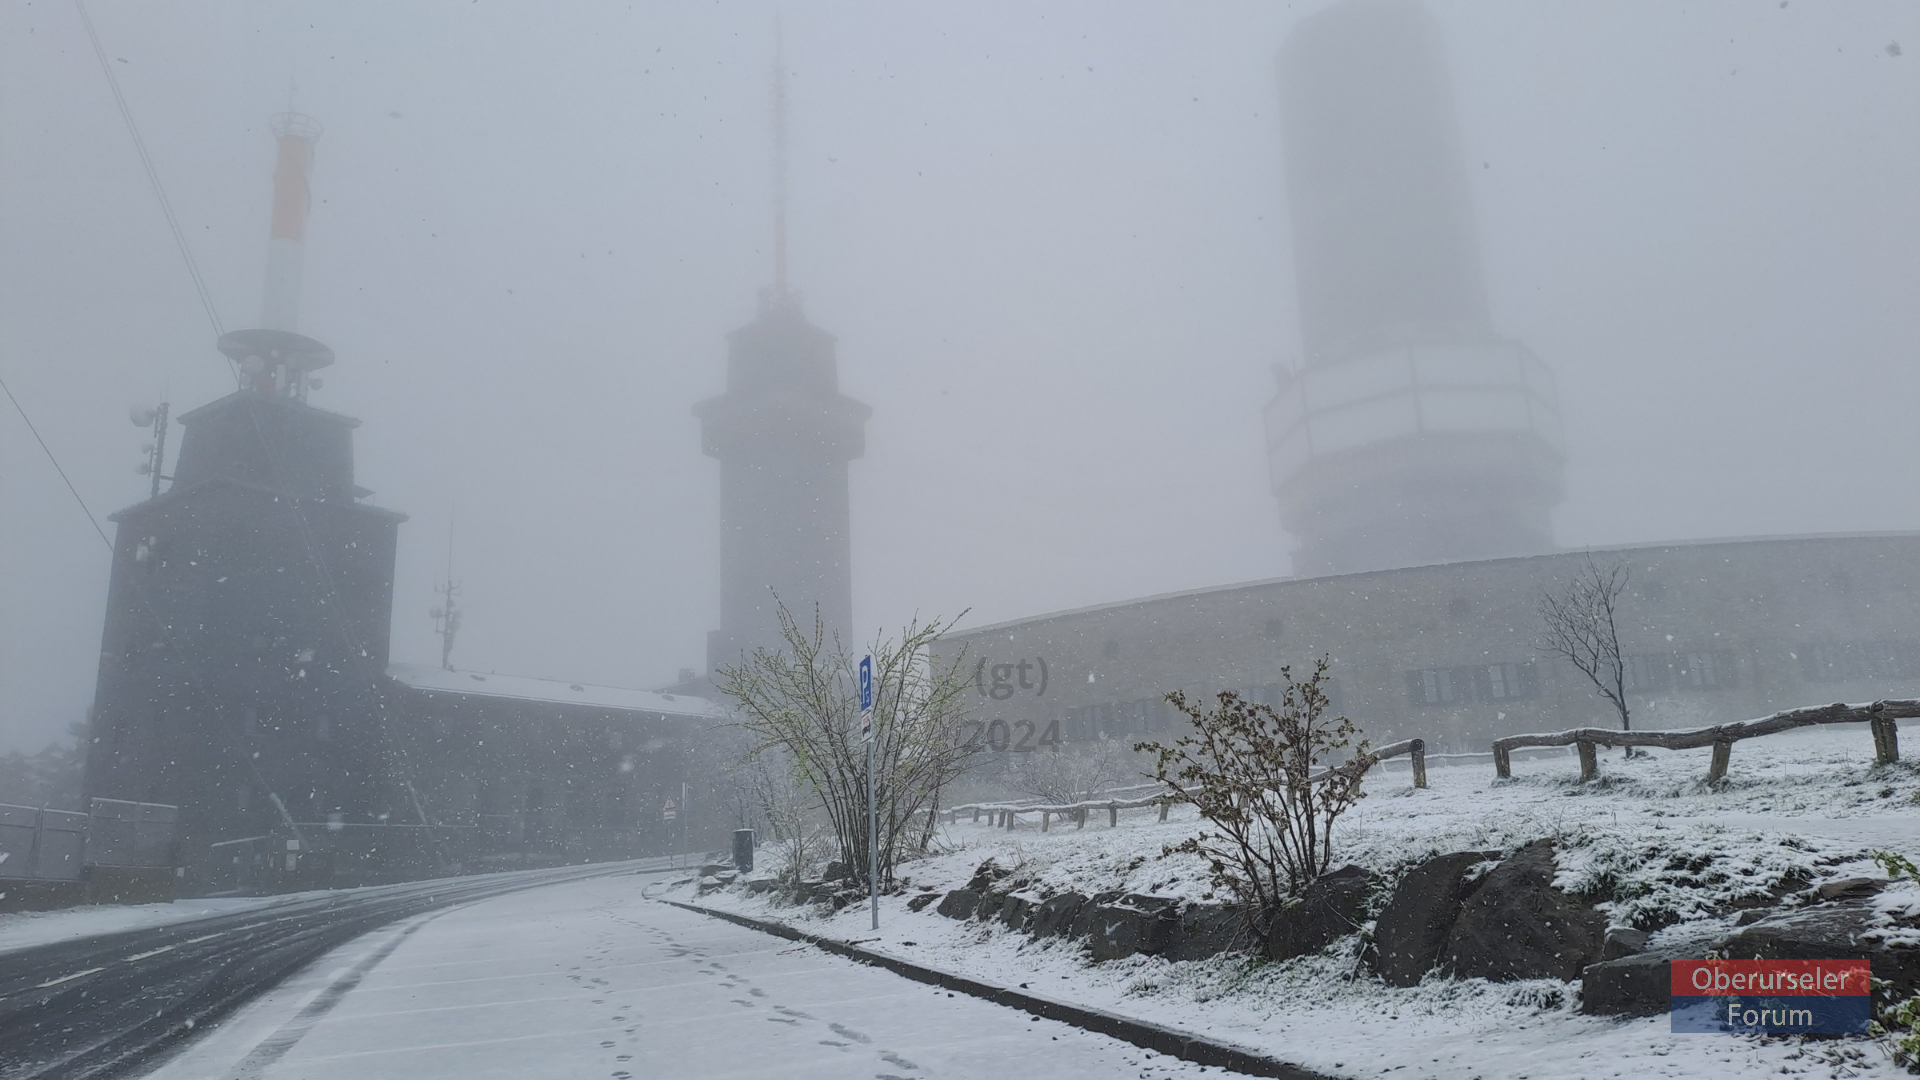 Snow at the summit of the Feldberg on 16th April, 2024